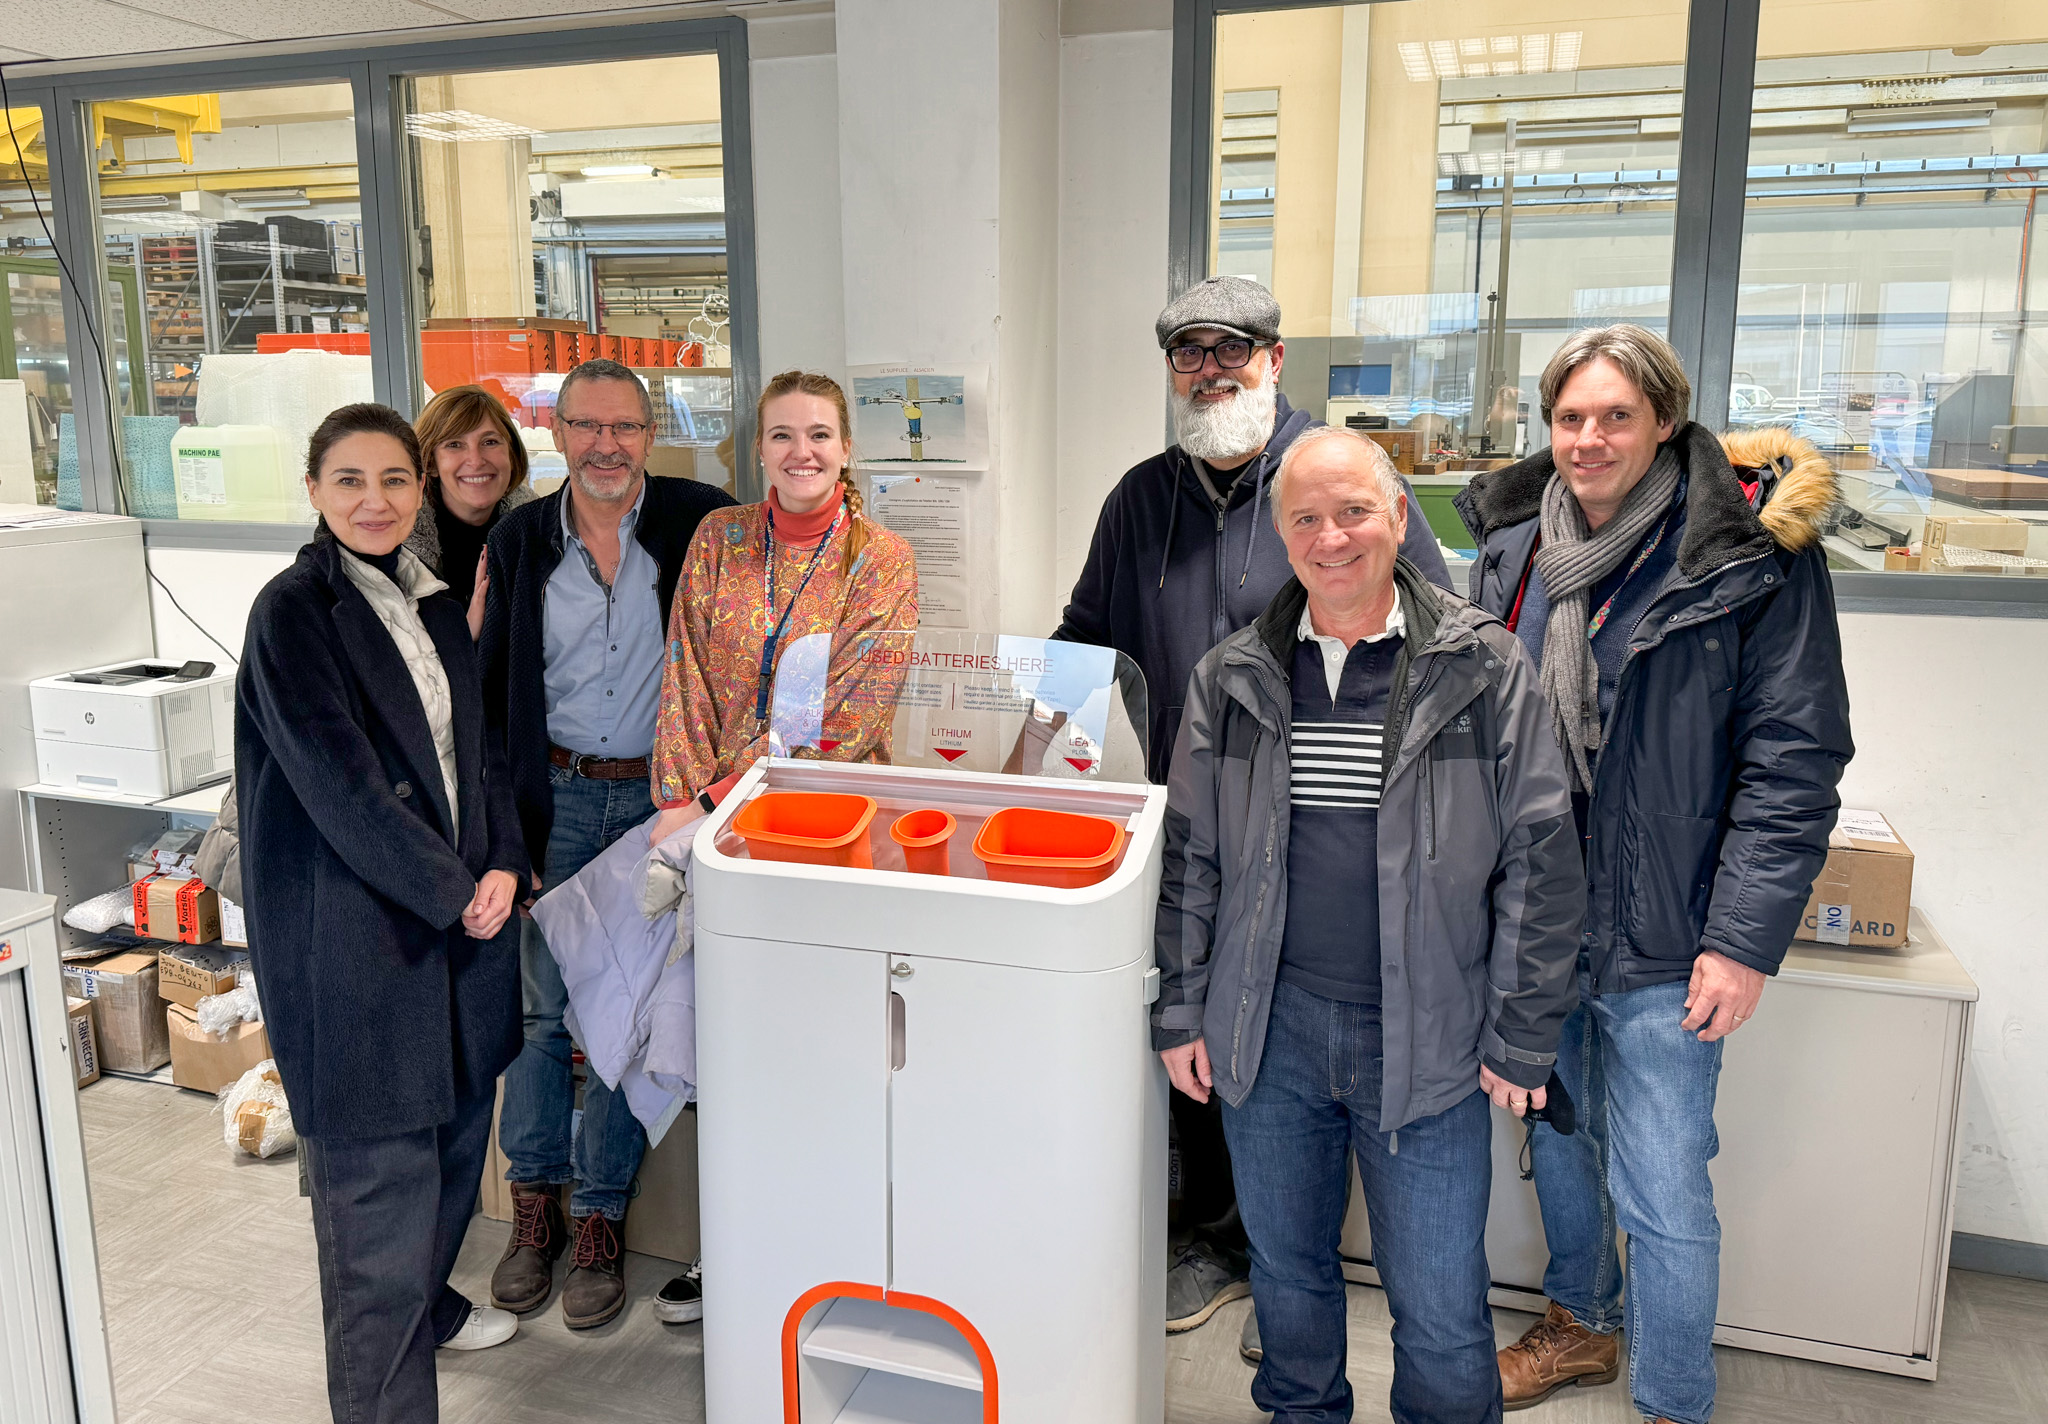 Re-designing a battery recollection container for CERN: when IdeaSquare alumni help with the laboratory recycling challenges